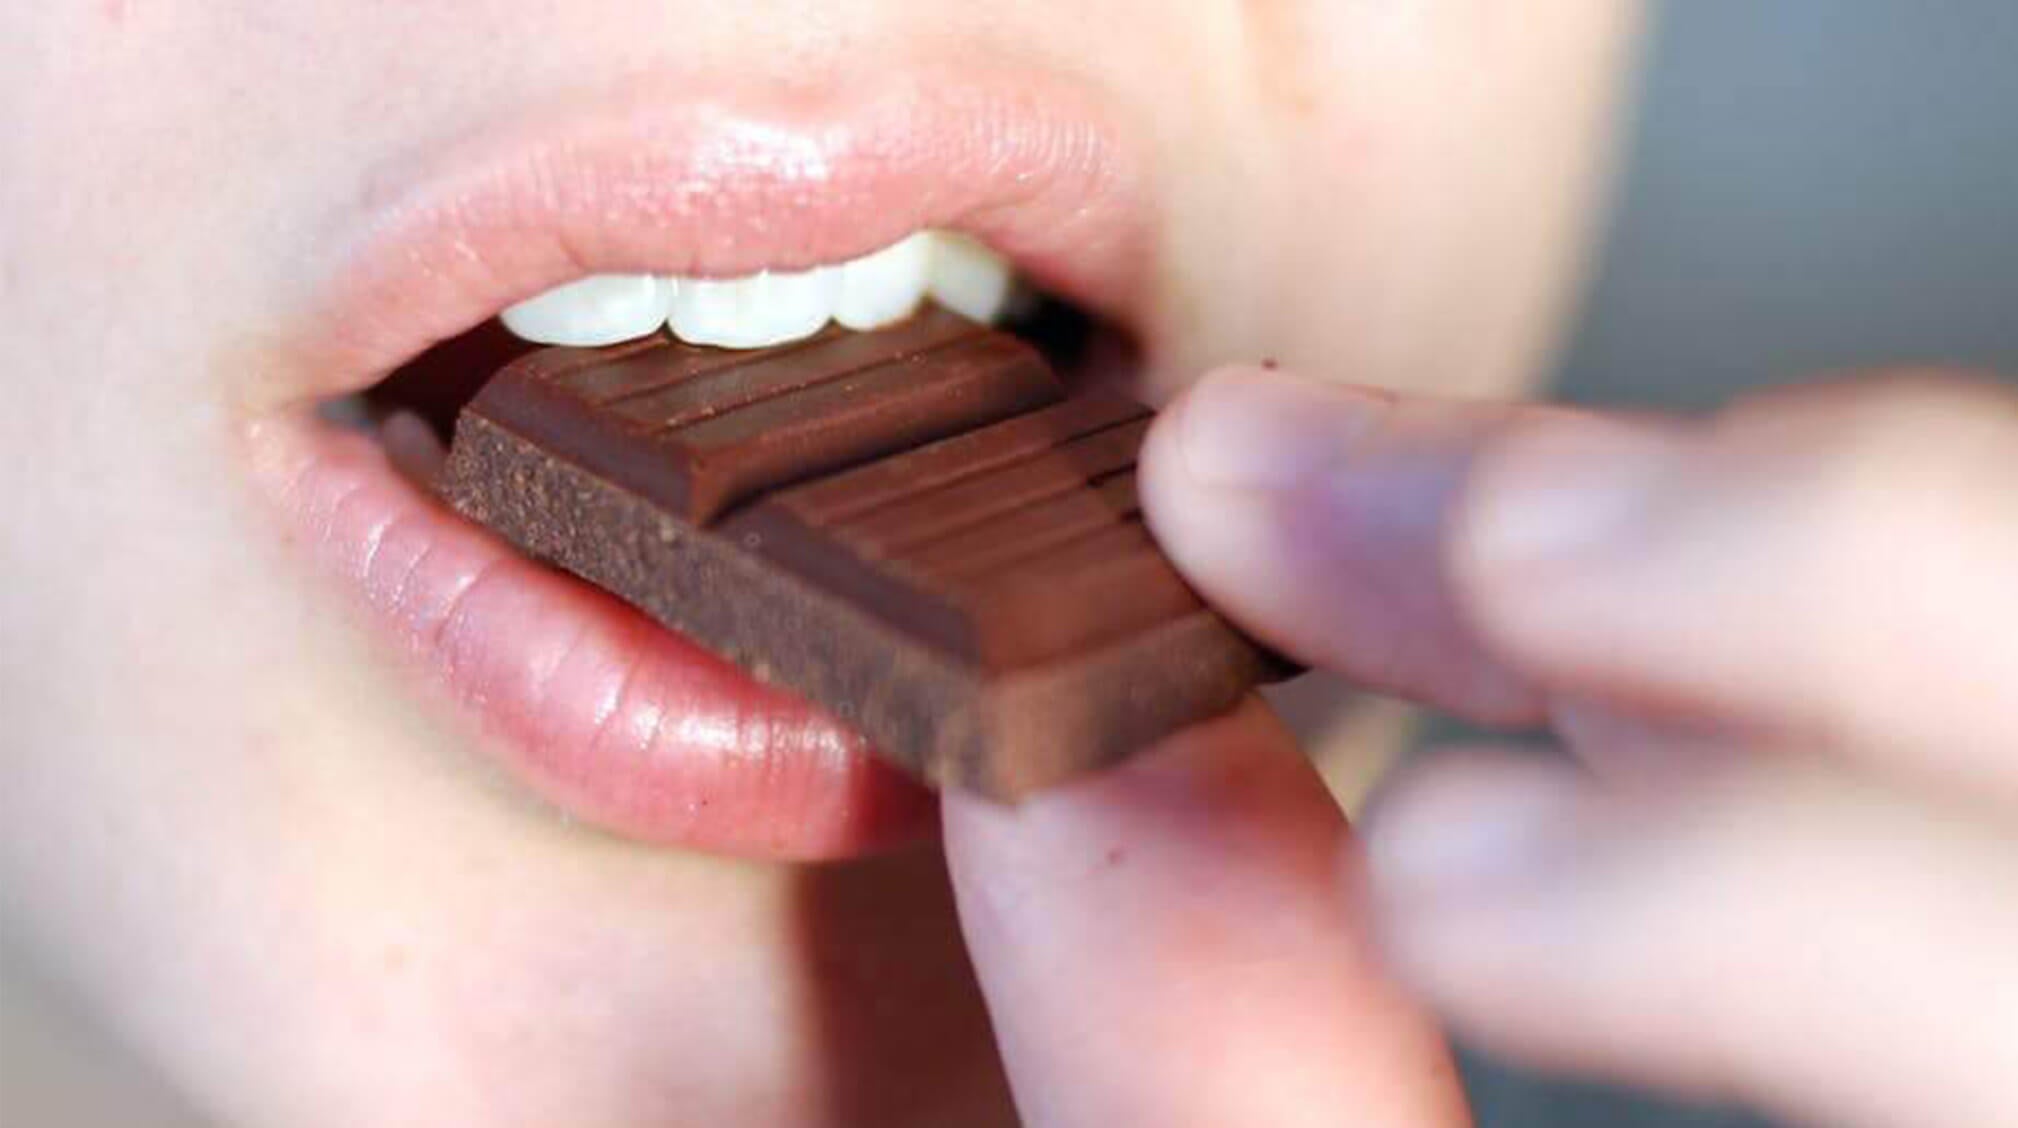 Image of person eating chocolate bar